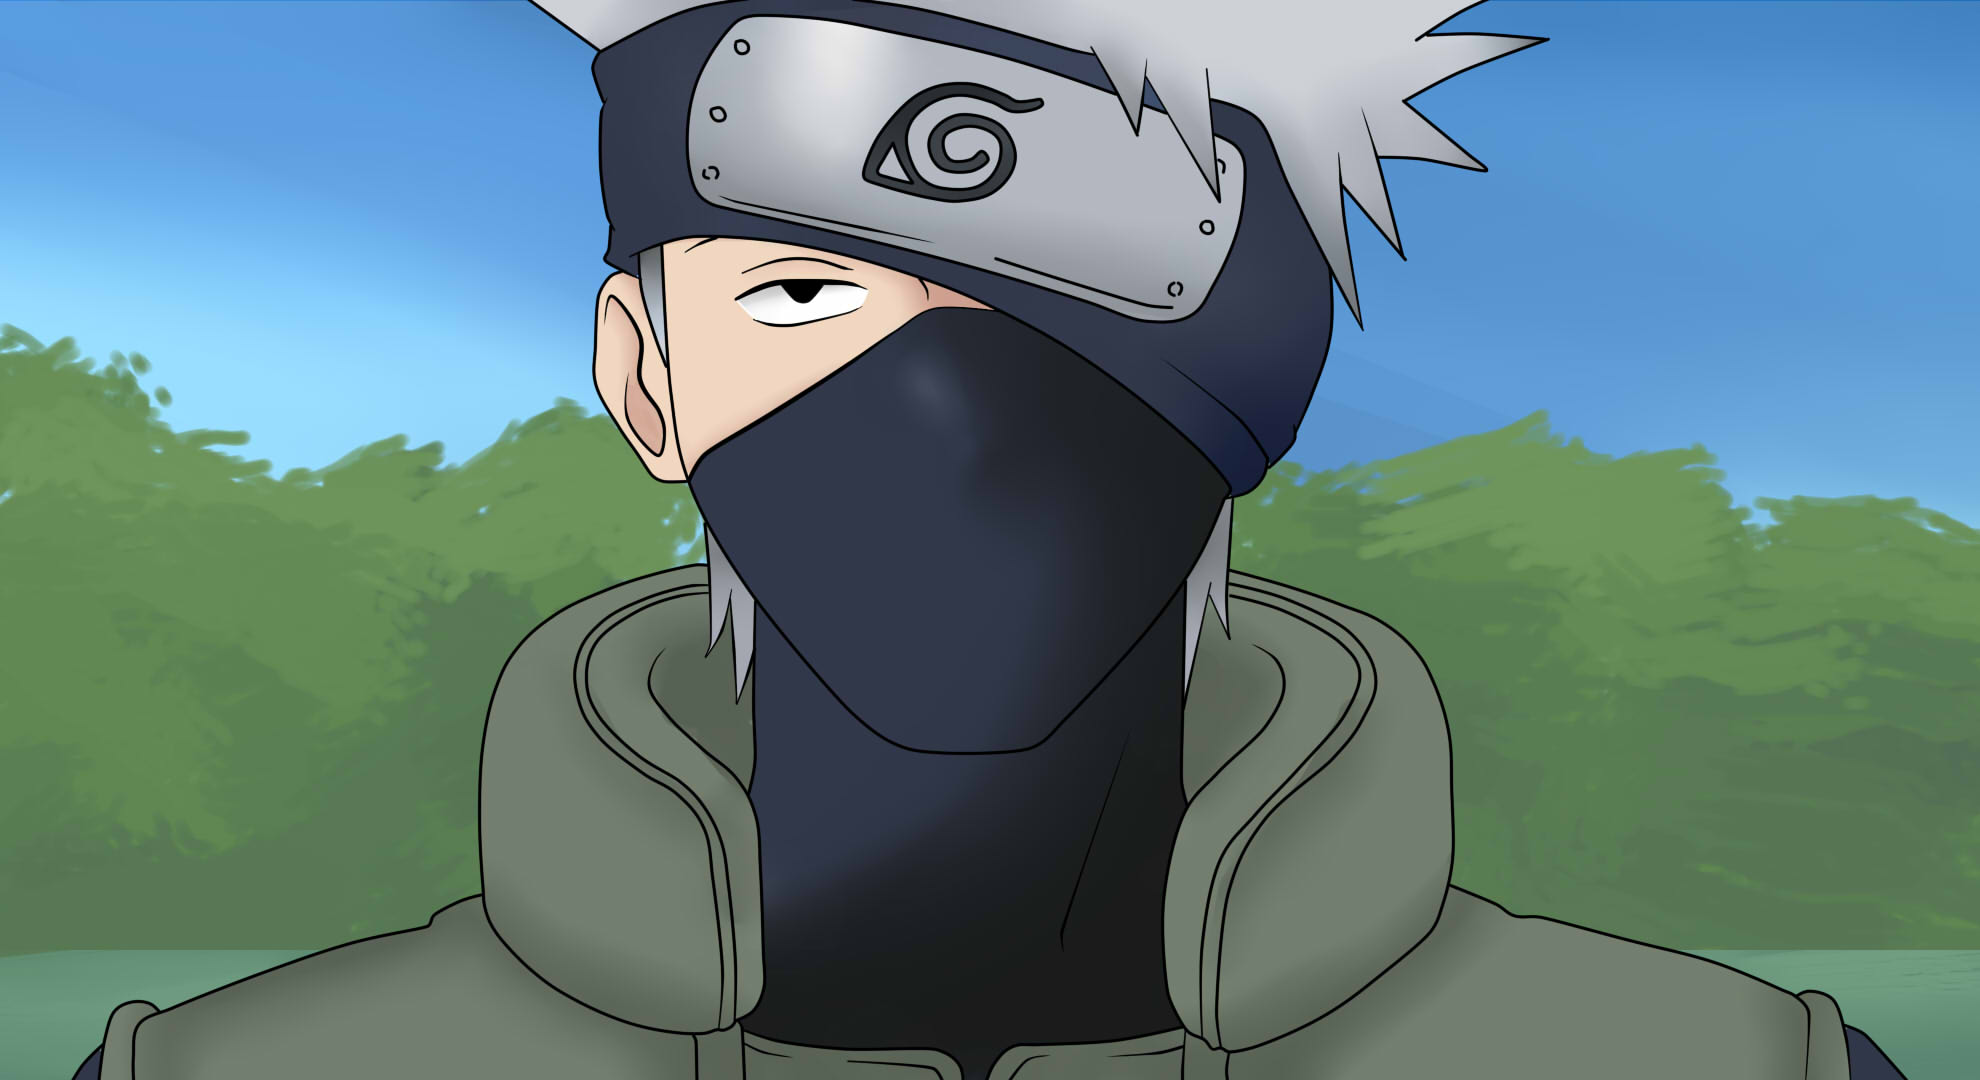 This is my most favorite naruto picture ever! 